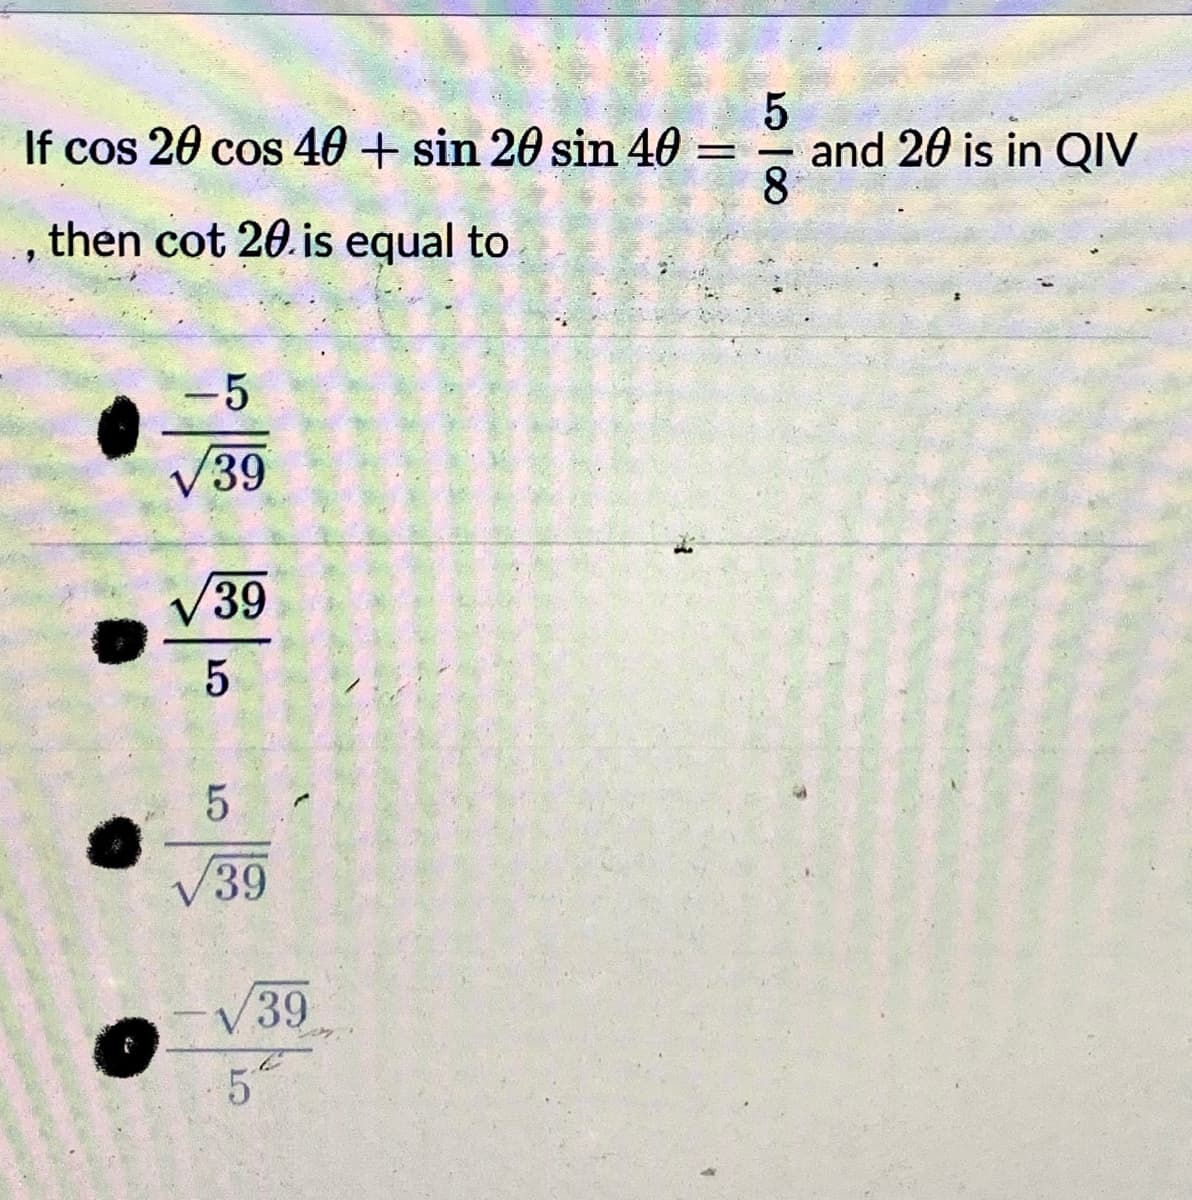 If cos 20 cos 40 + sin 20 sin 40 =
and 20 is in QIV
8
then cot 20. is equal to
V39
V39
V39
V39
